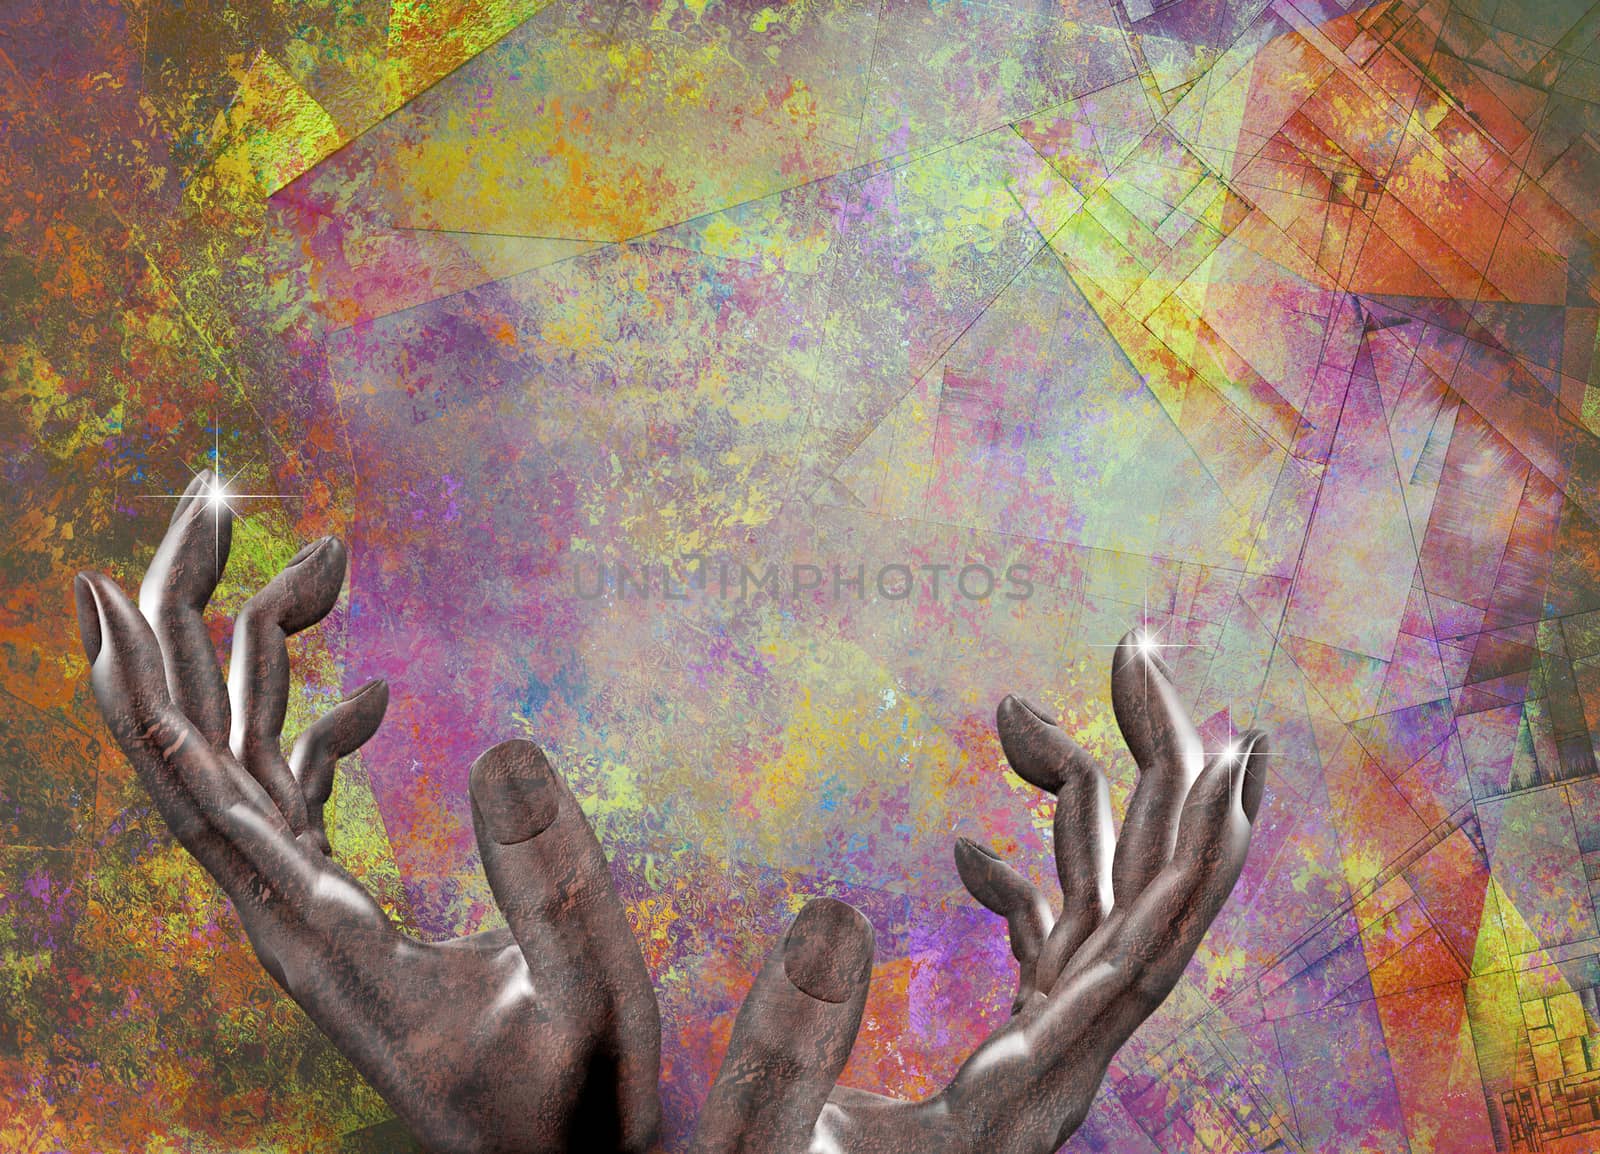 Human hands on abstract backgroung by applesstock